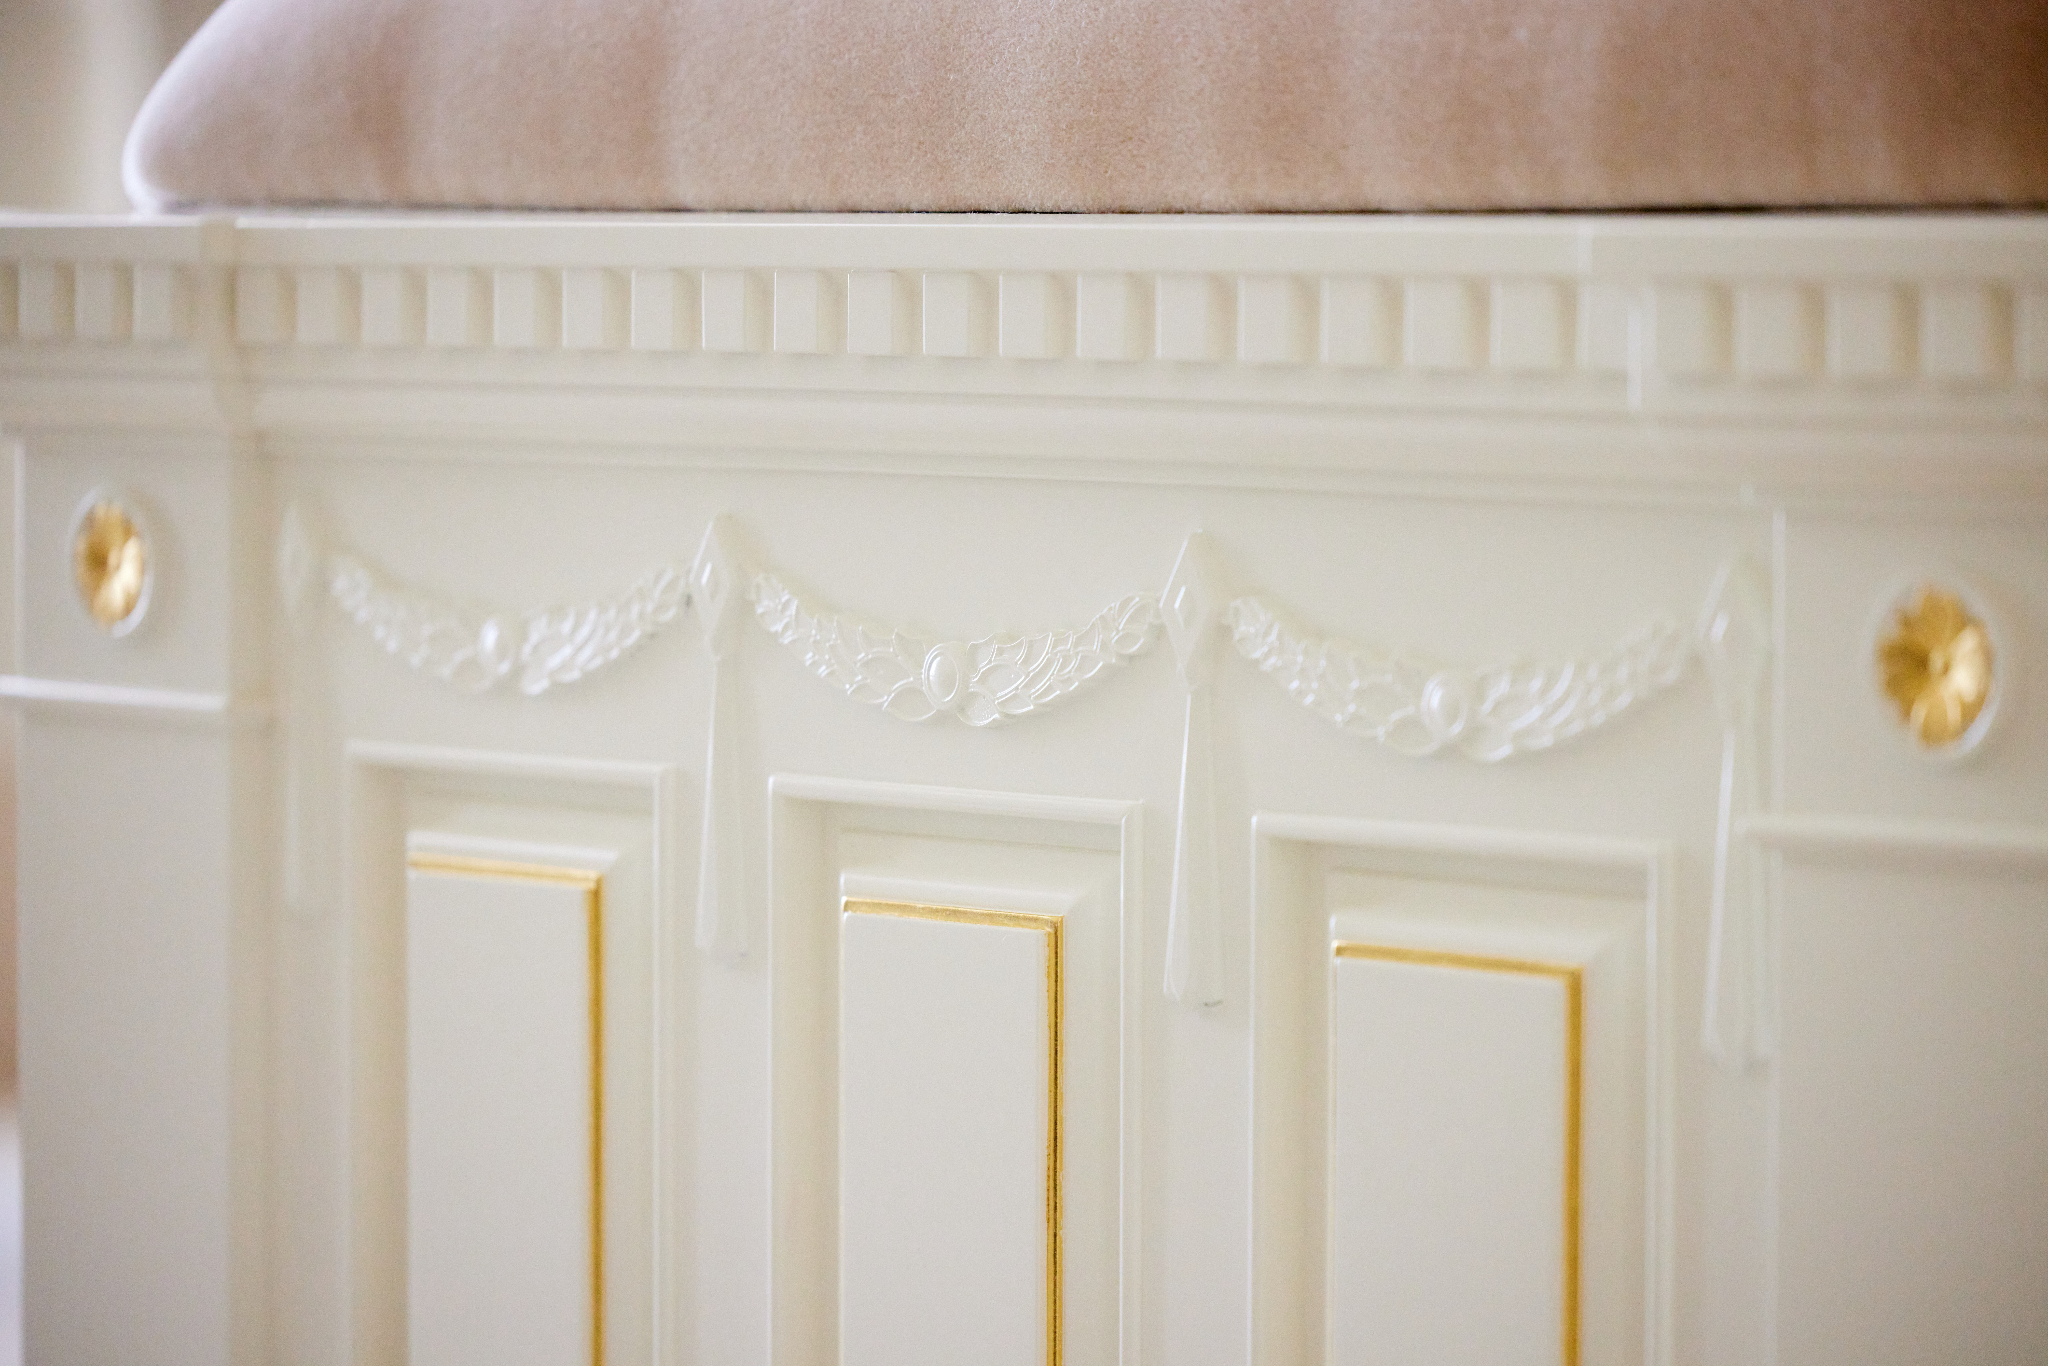 A close-up of wooden millwork painted white with tiny gold lines.